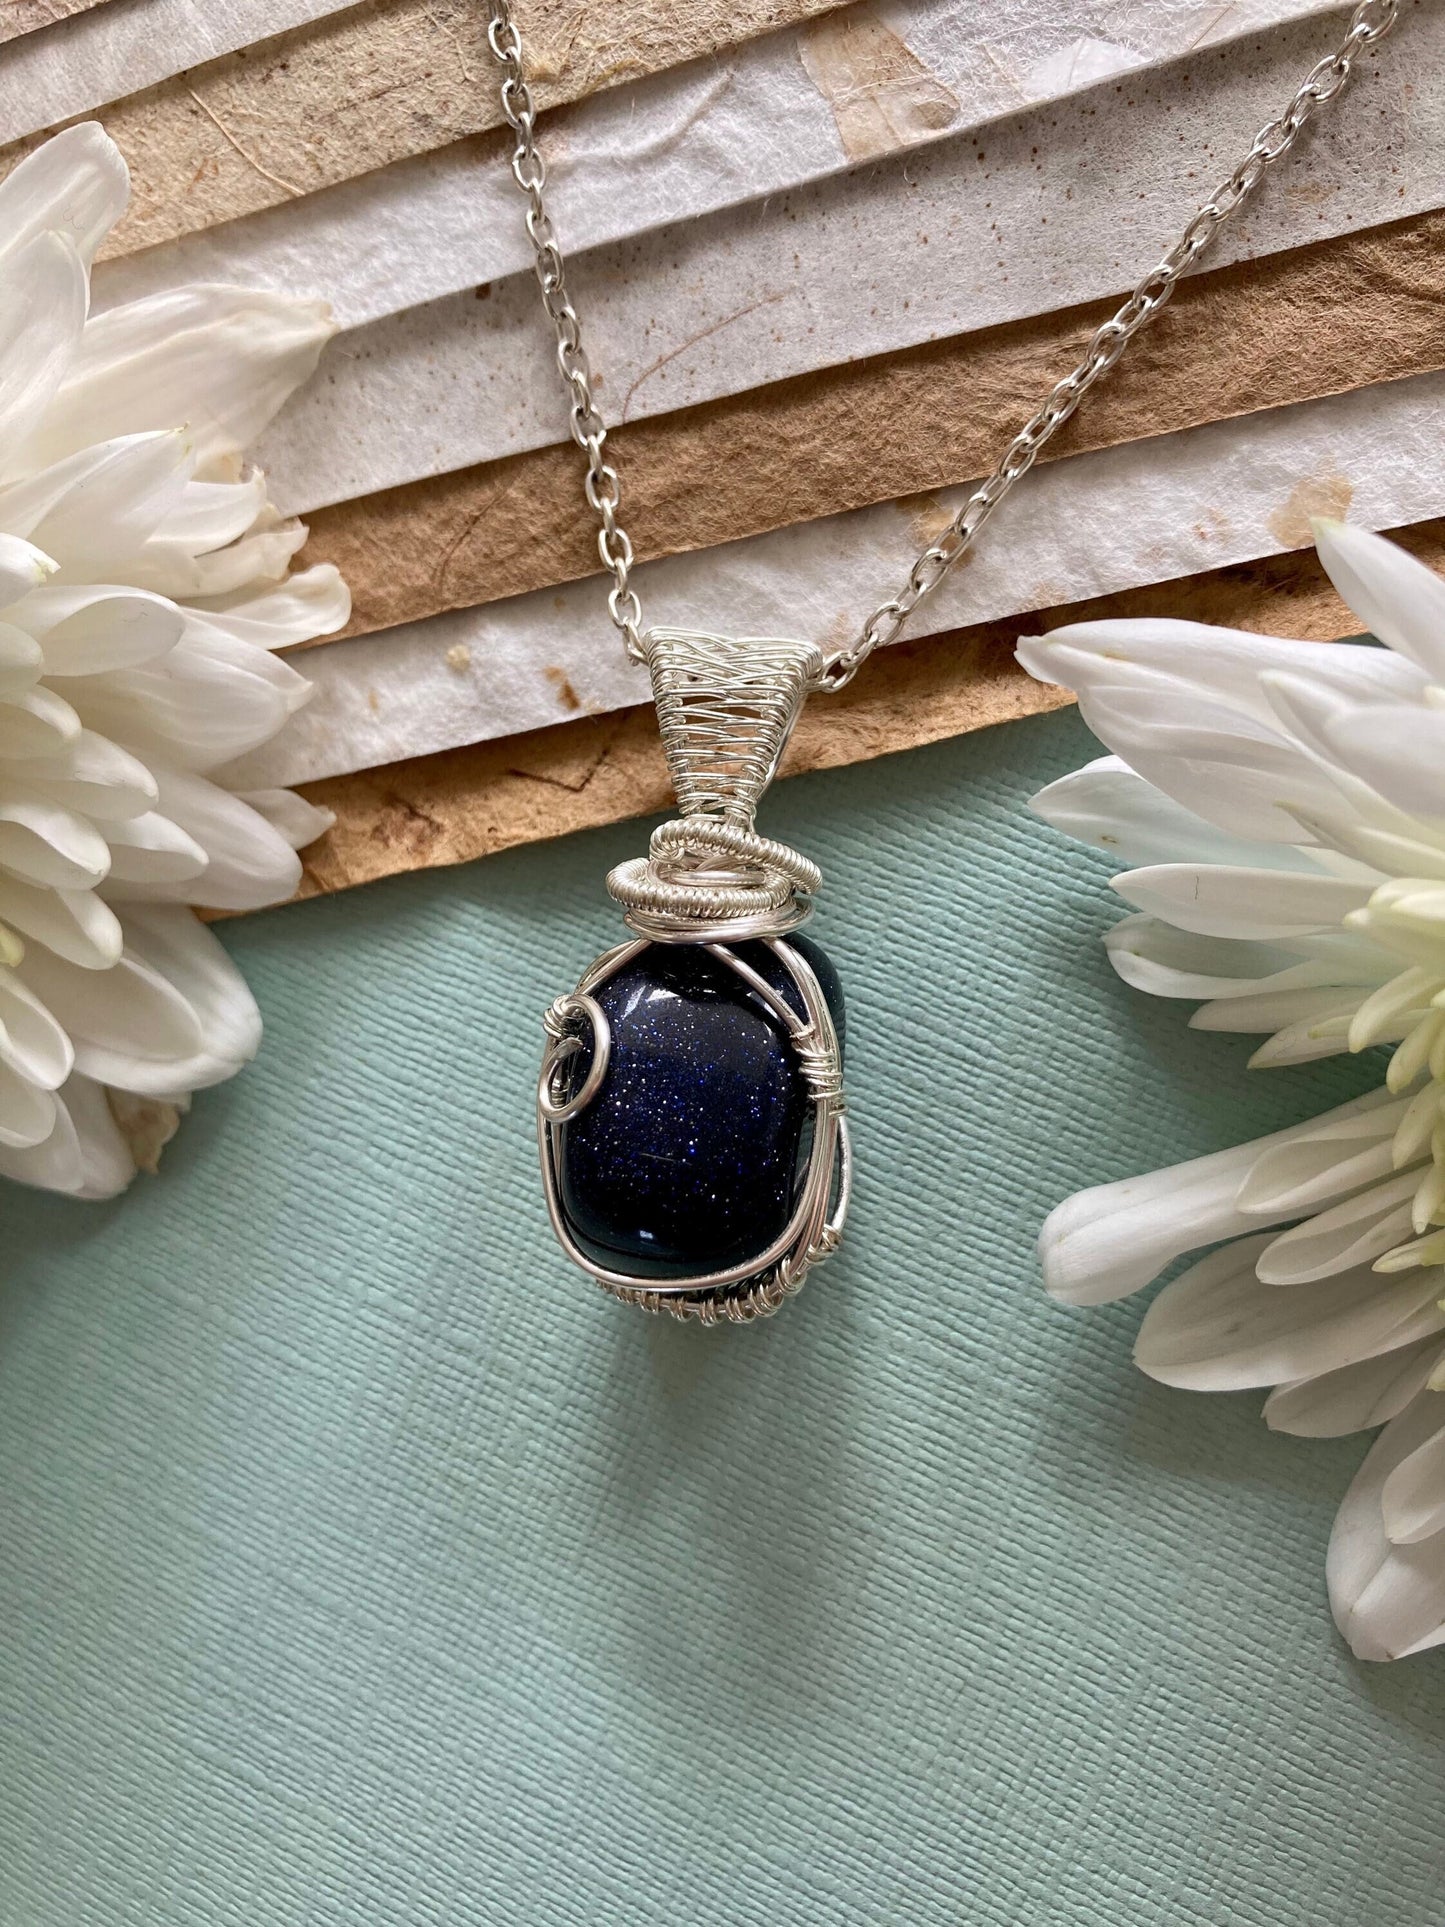 Blue goldstone pendant handmade necklace wire wrapped natural stone with 18 inch length chain